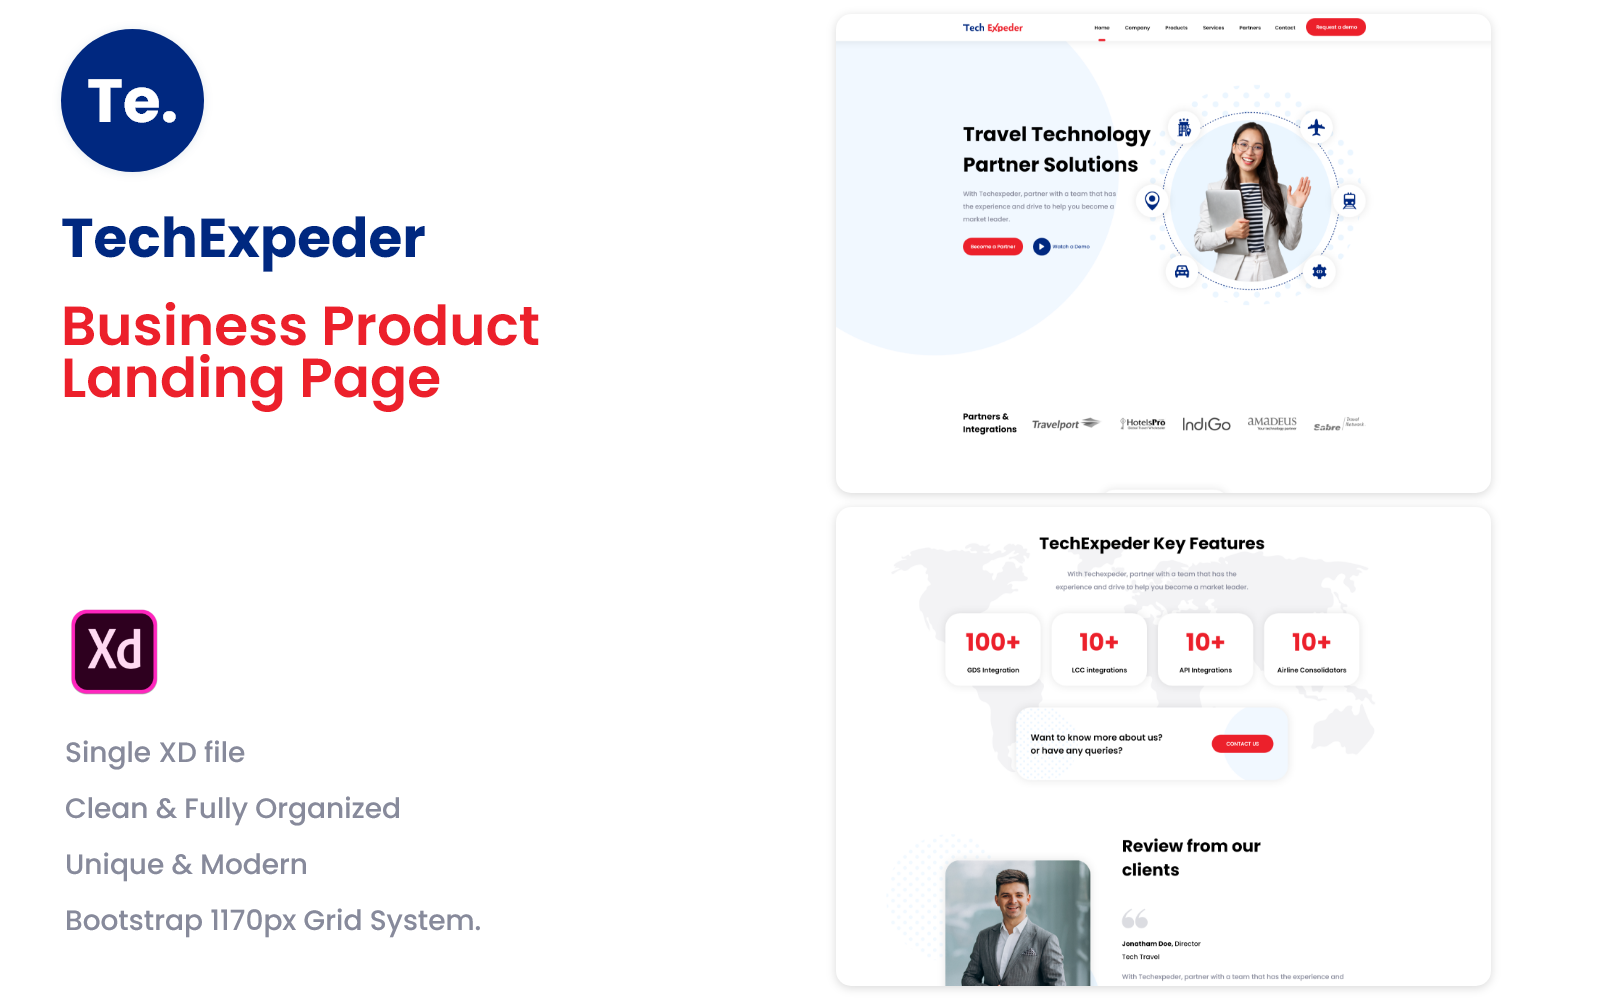 TechExpeder - Business Product Landing Page